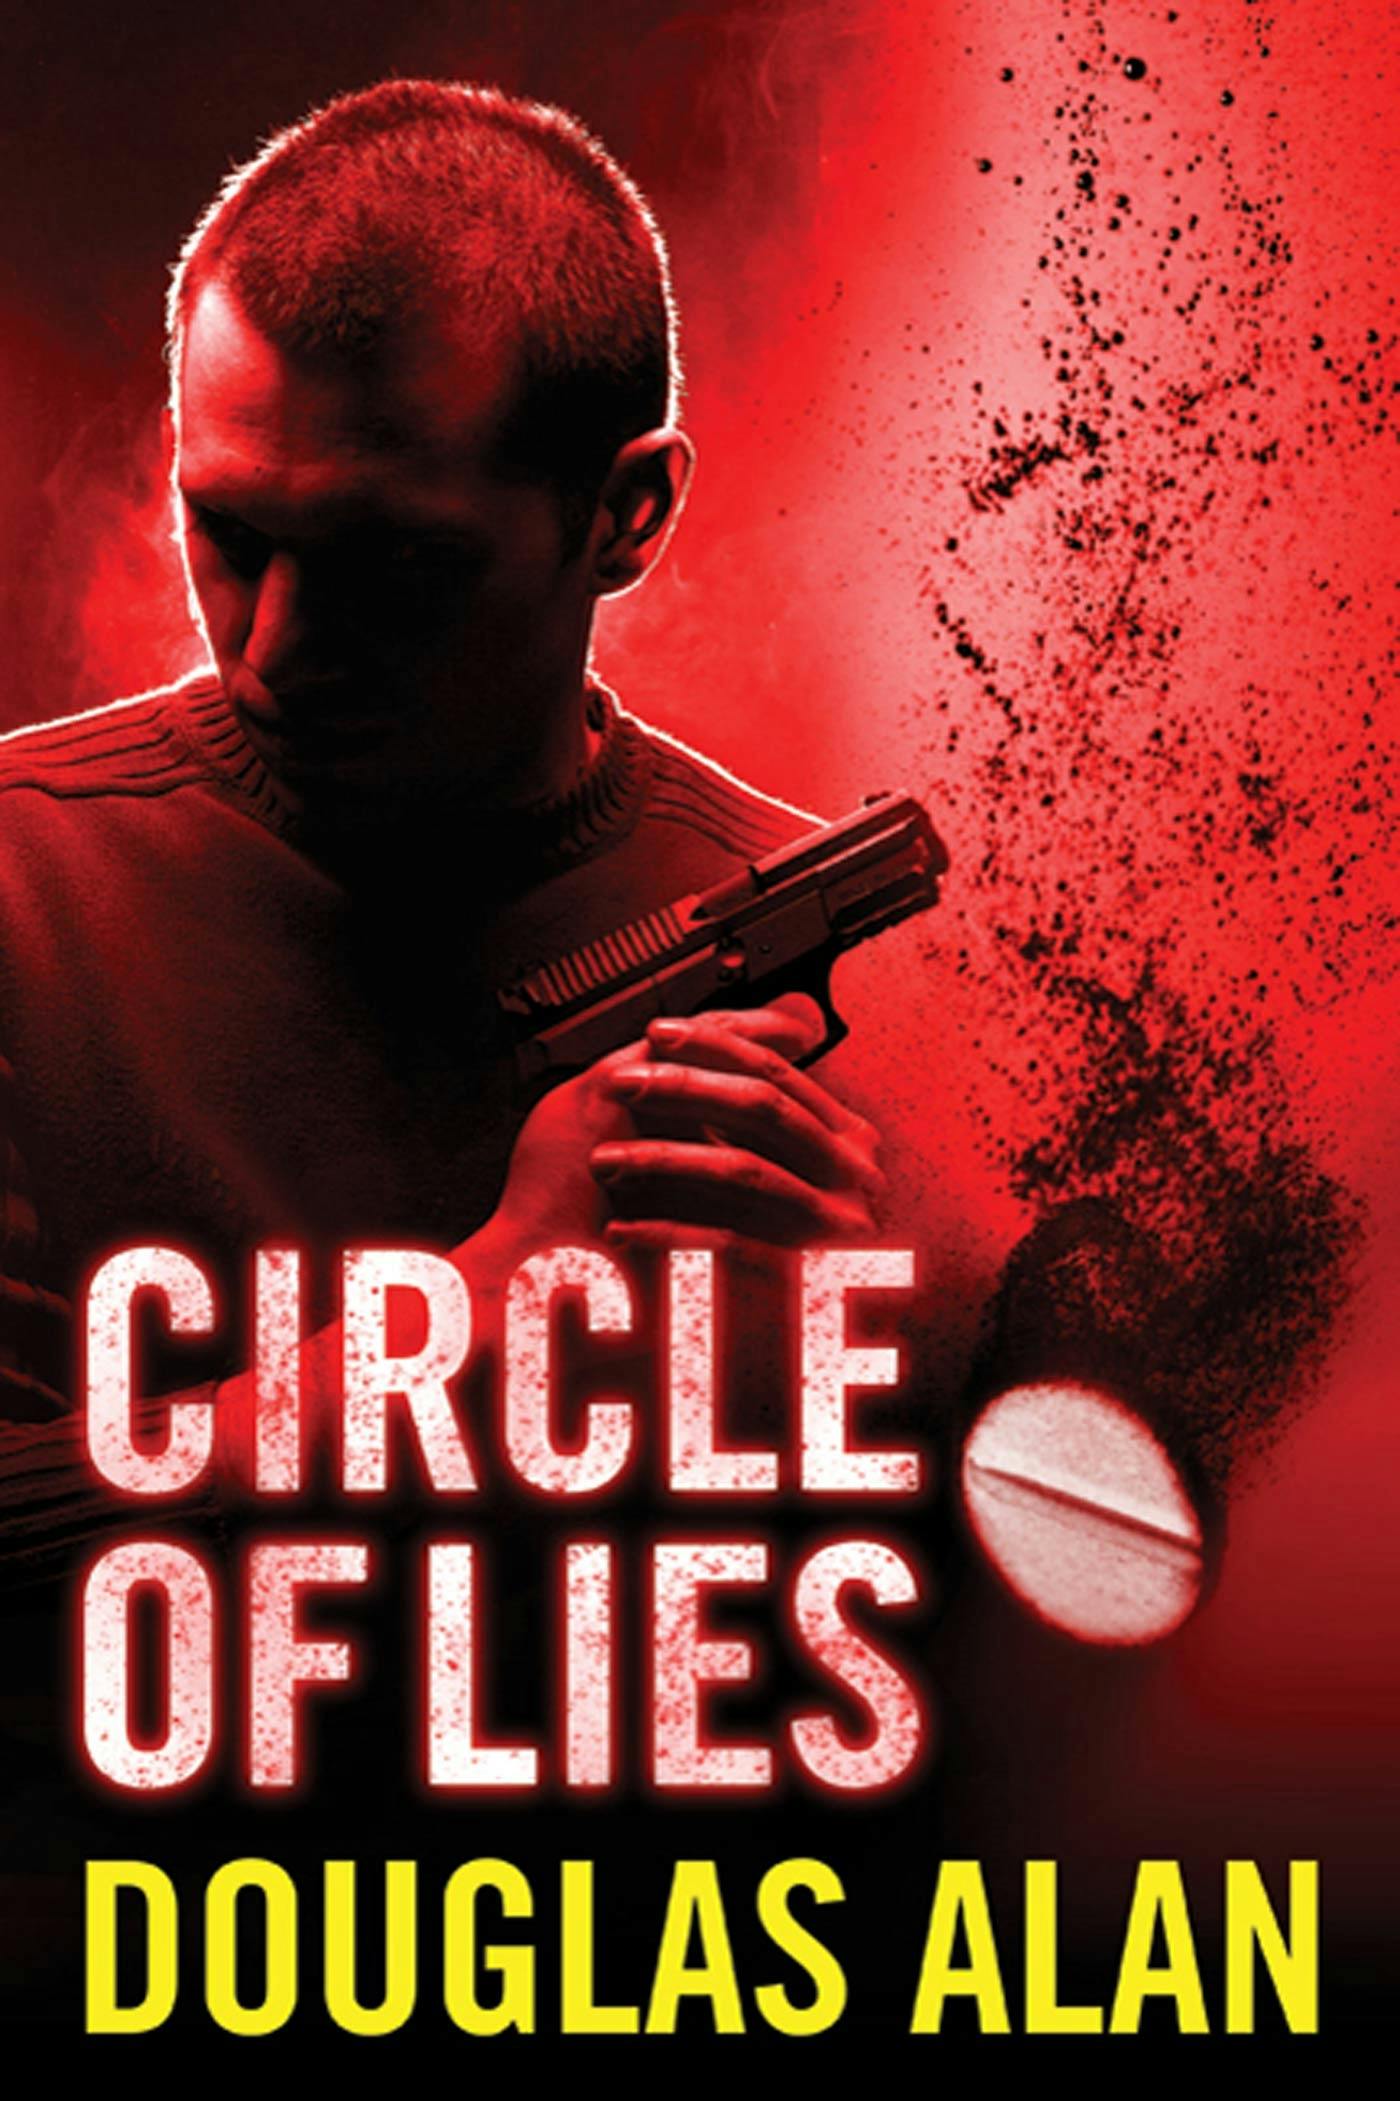 Cover for the book titled as: Circle of Lies